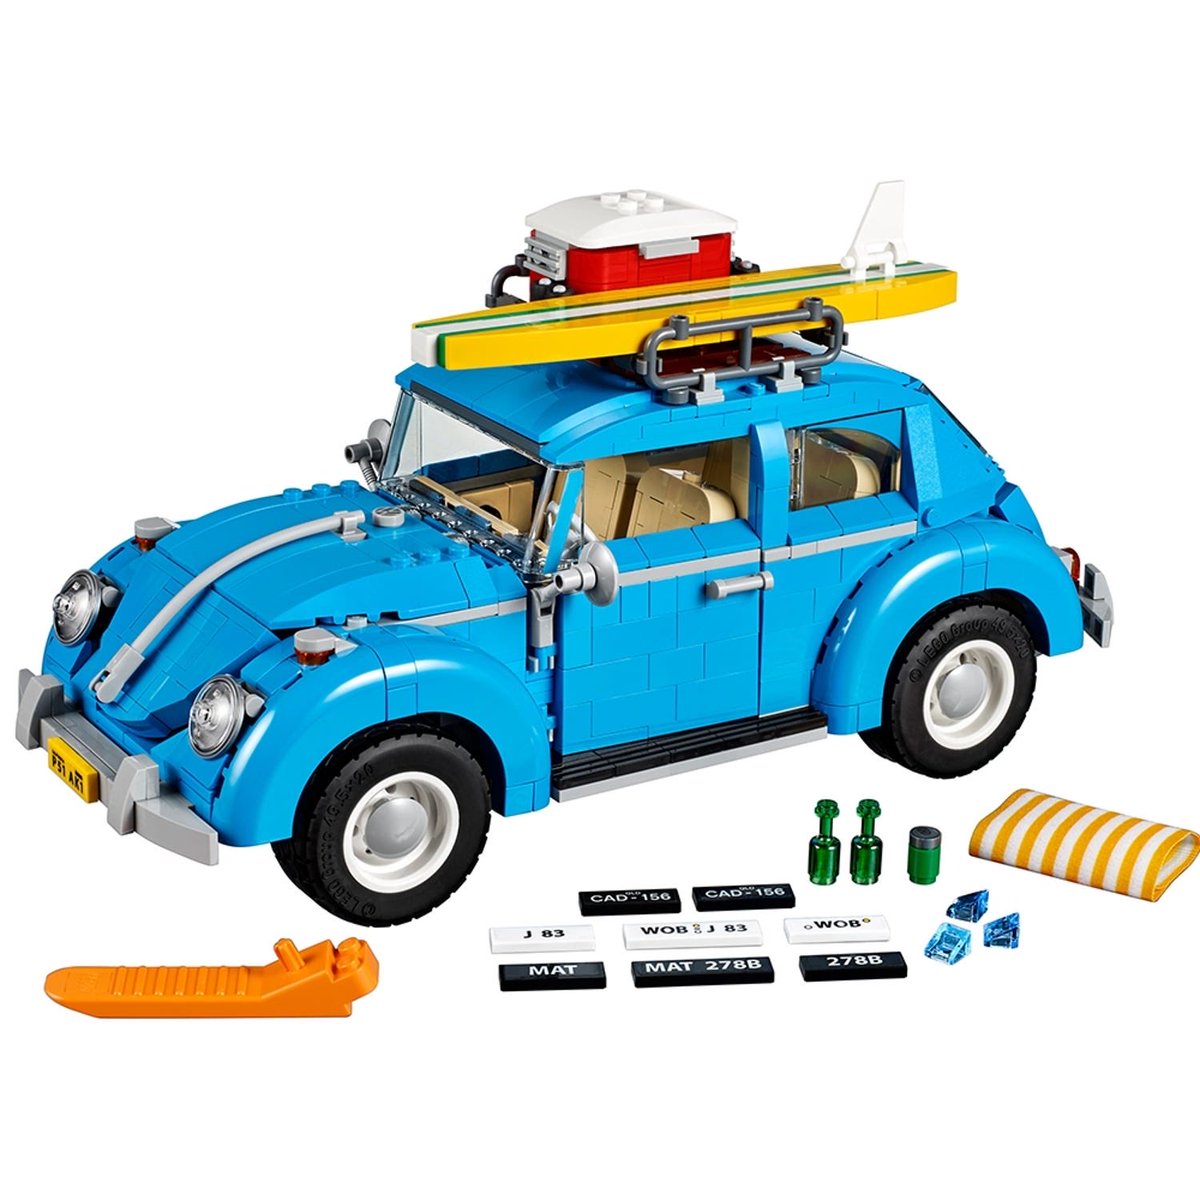 I remembered when LEGO ideas showcased a BR50 that someone made and everyone coming in and calling it a N!zi train. While I could understand where they are coming from by that logic lego shouldn’t make a VW Car because of it’s similar history 

At the end of the day I feel…